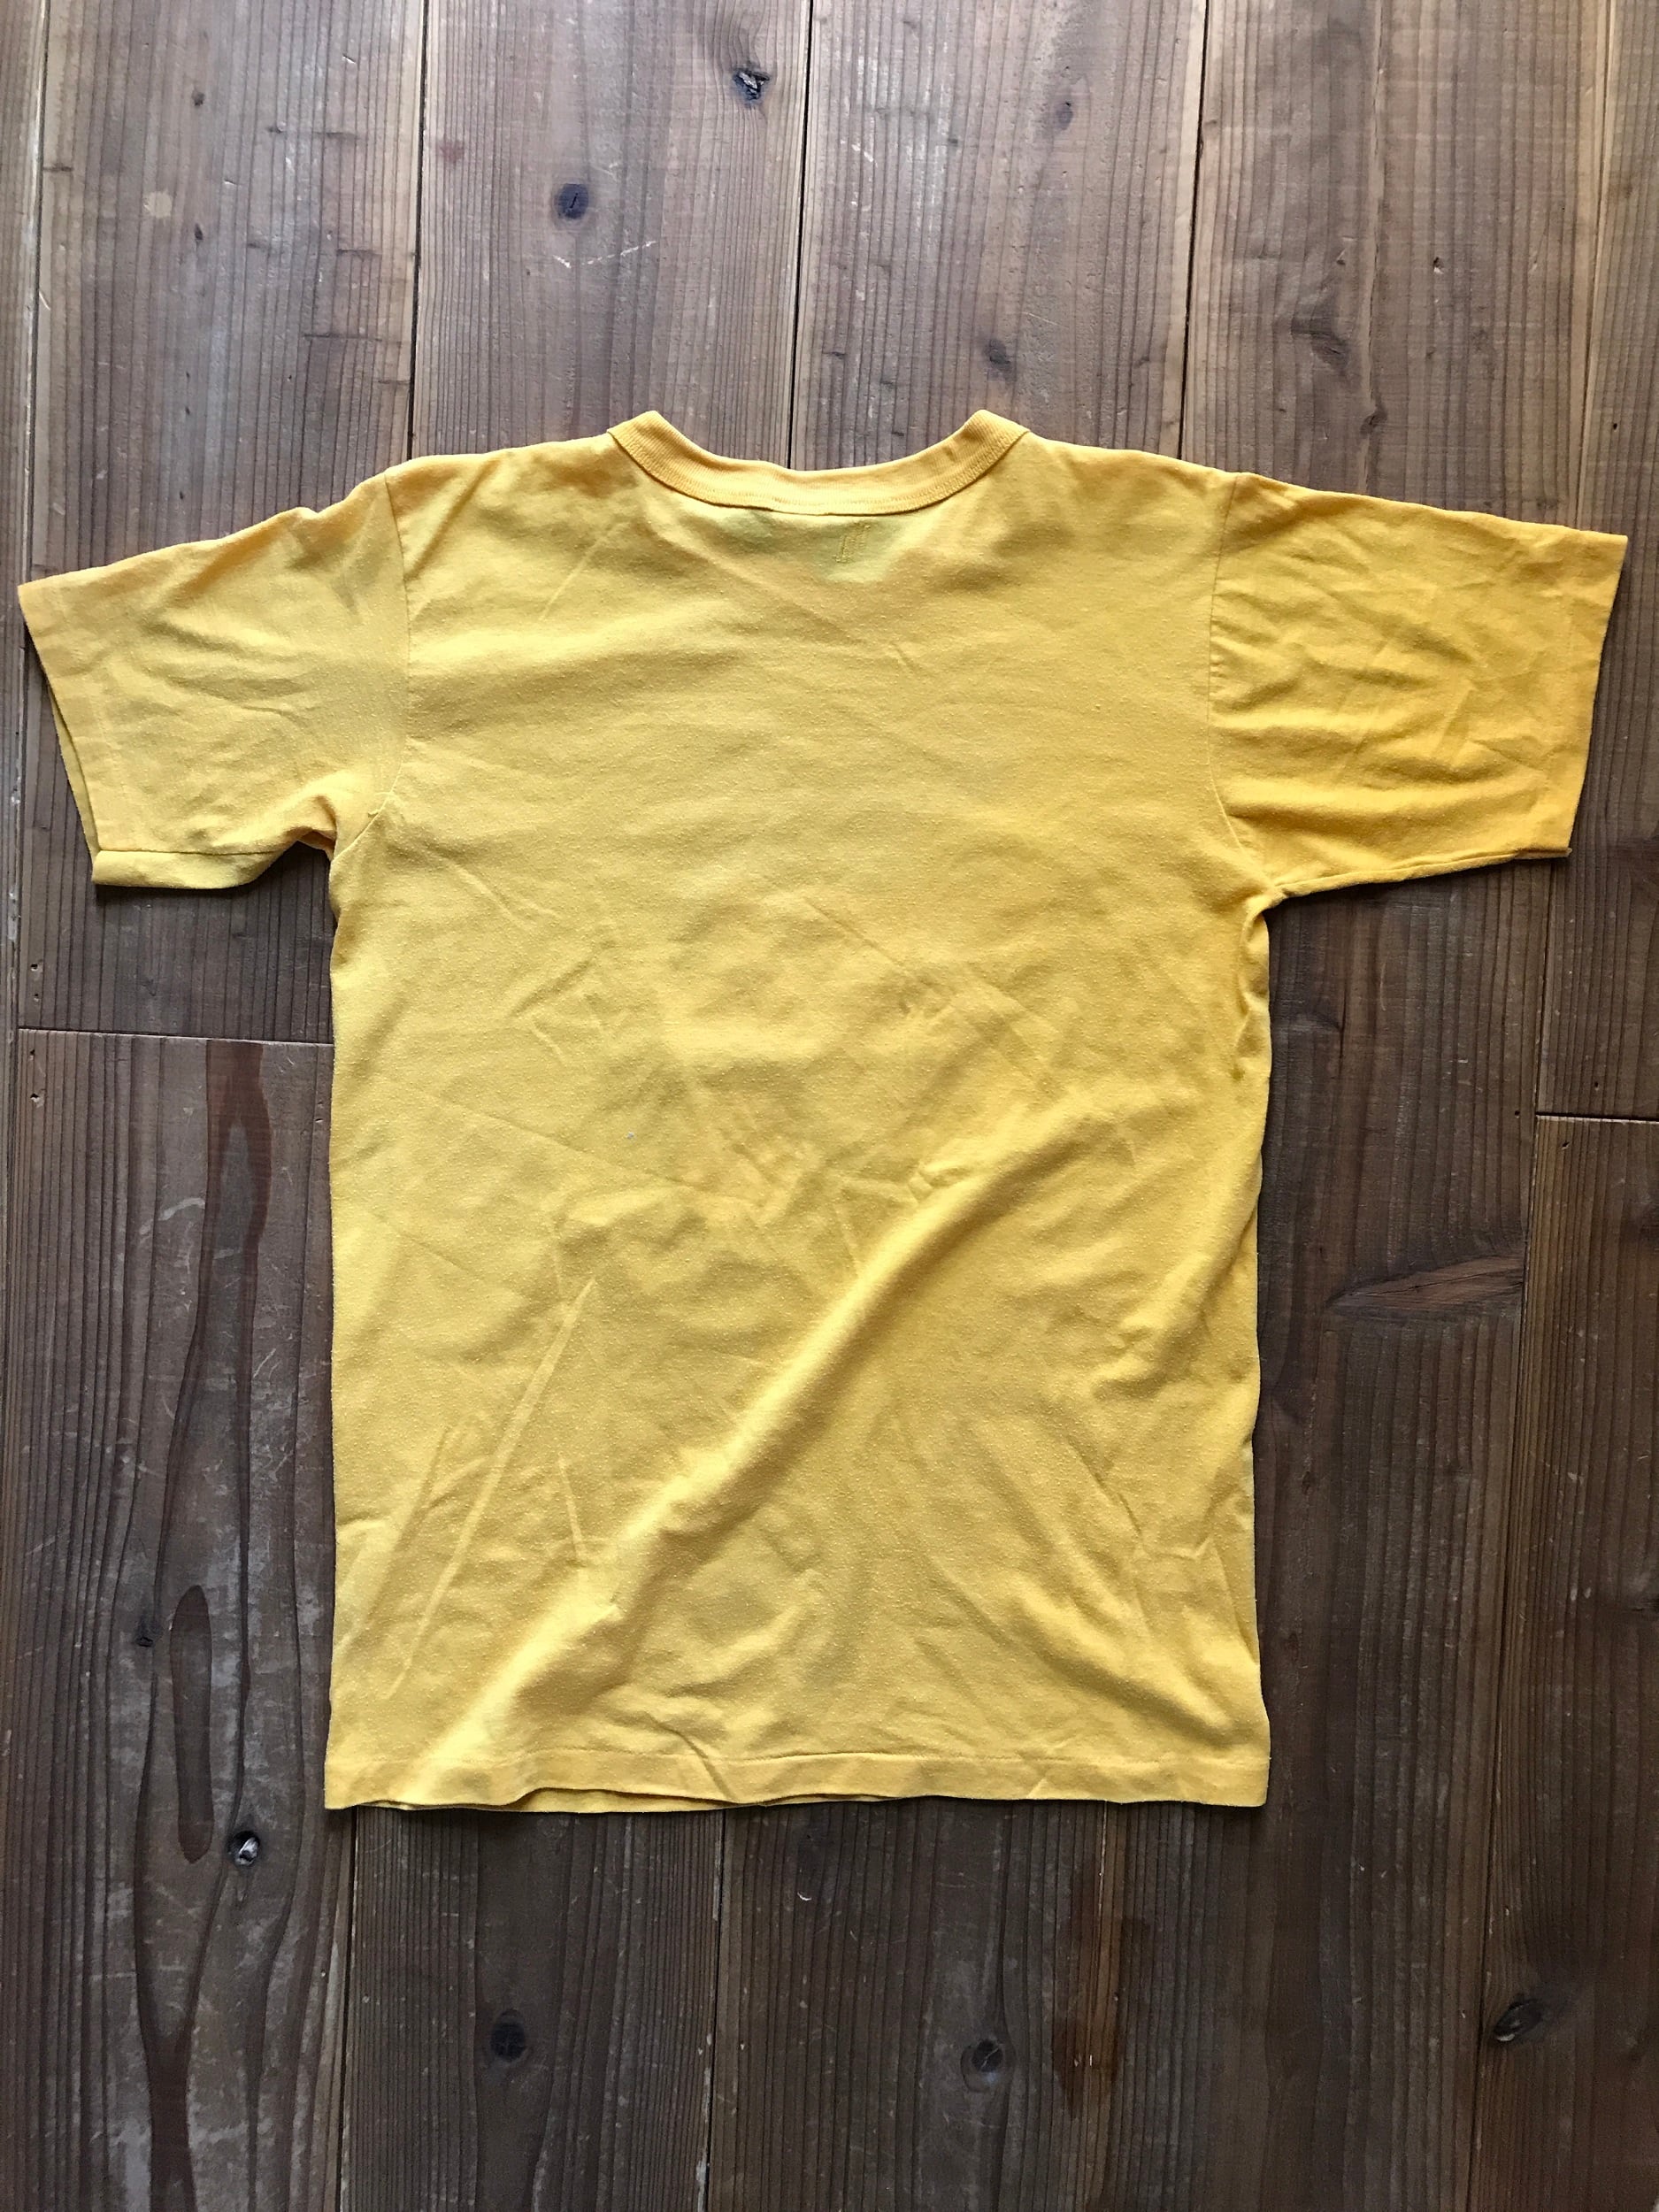 70's Adver・Tee's "have a golden day!" Tシャツ 表記(M) USA製